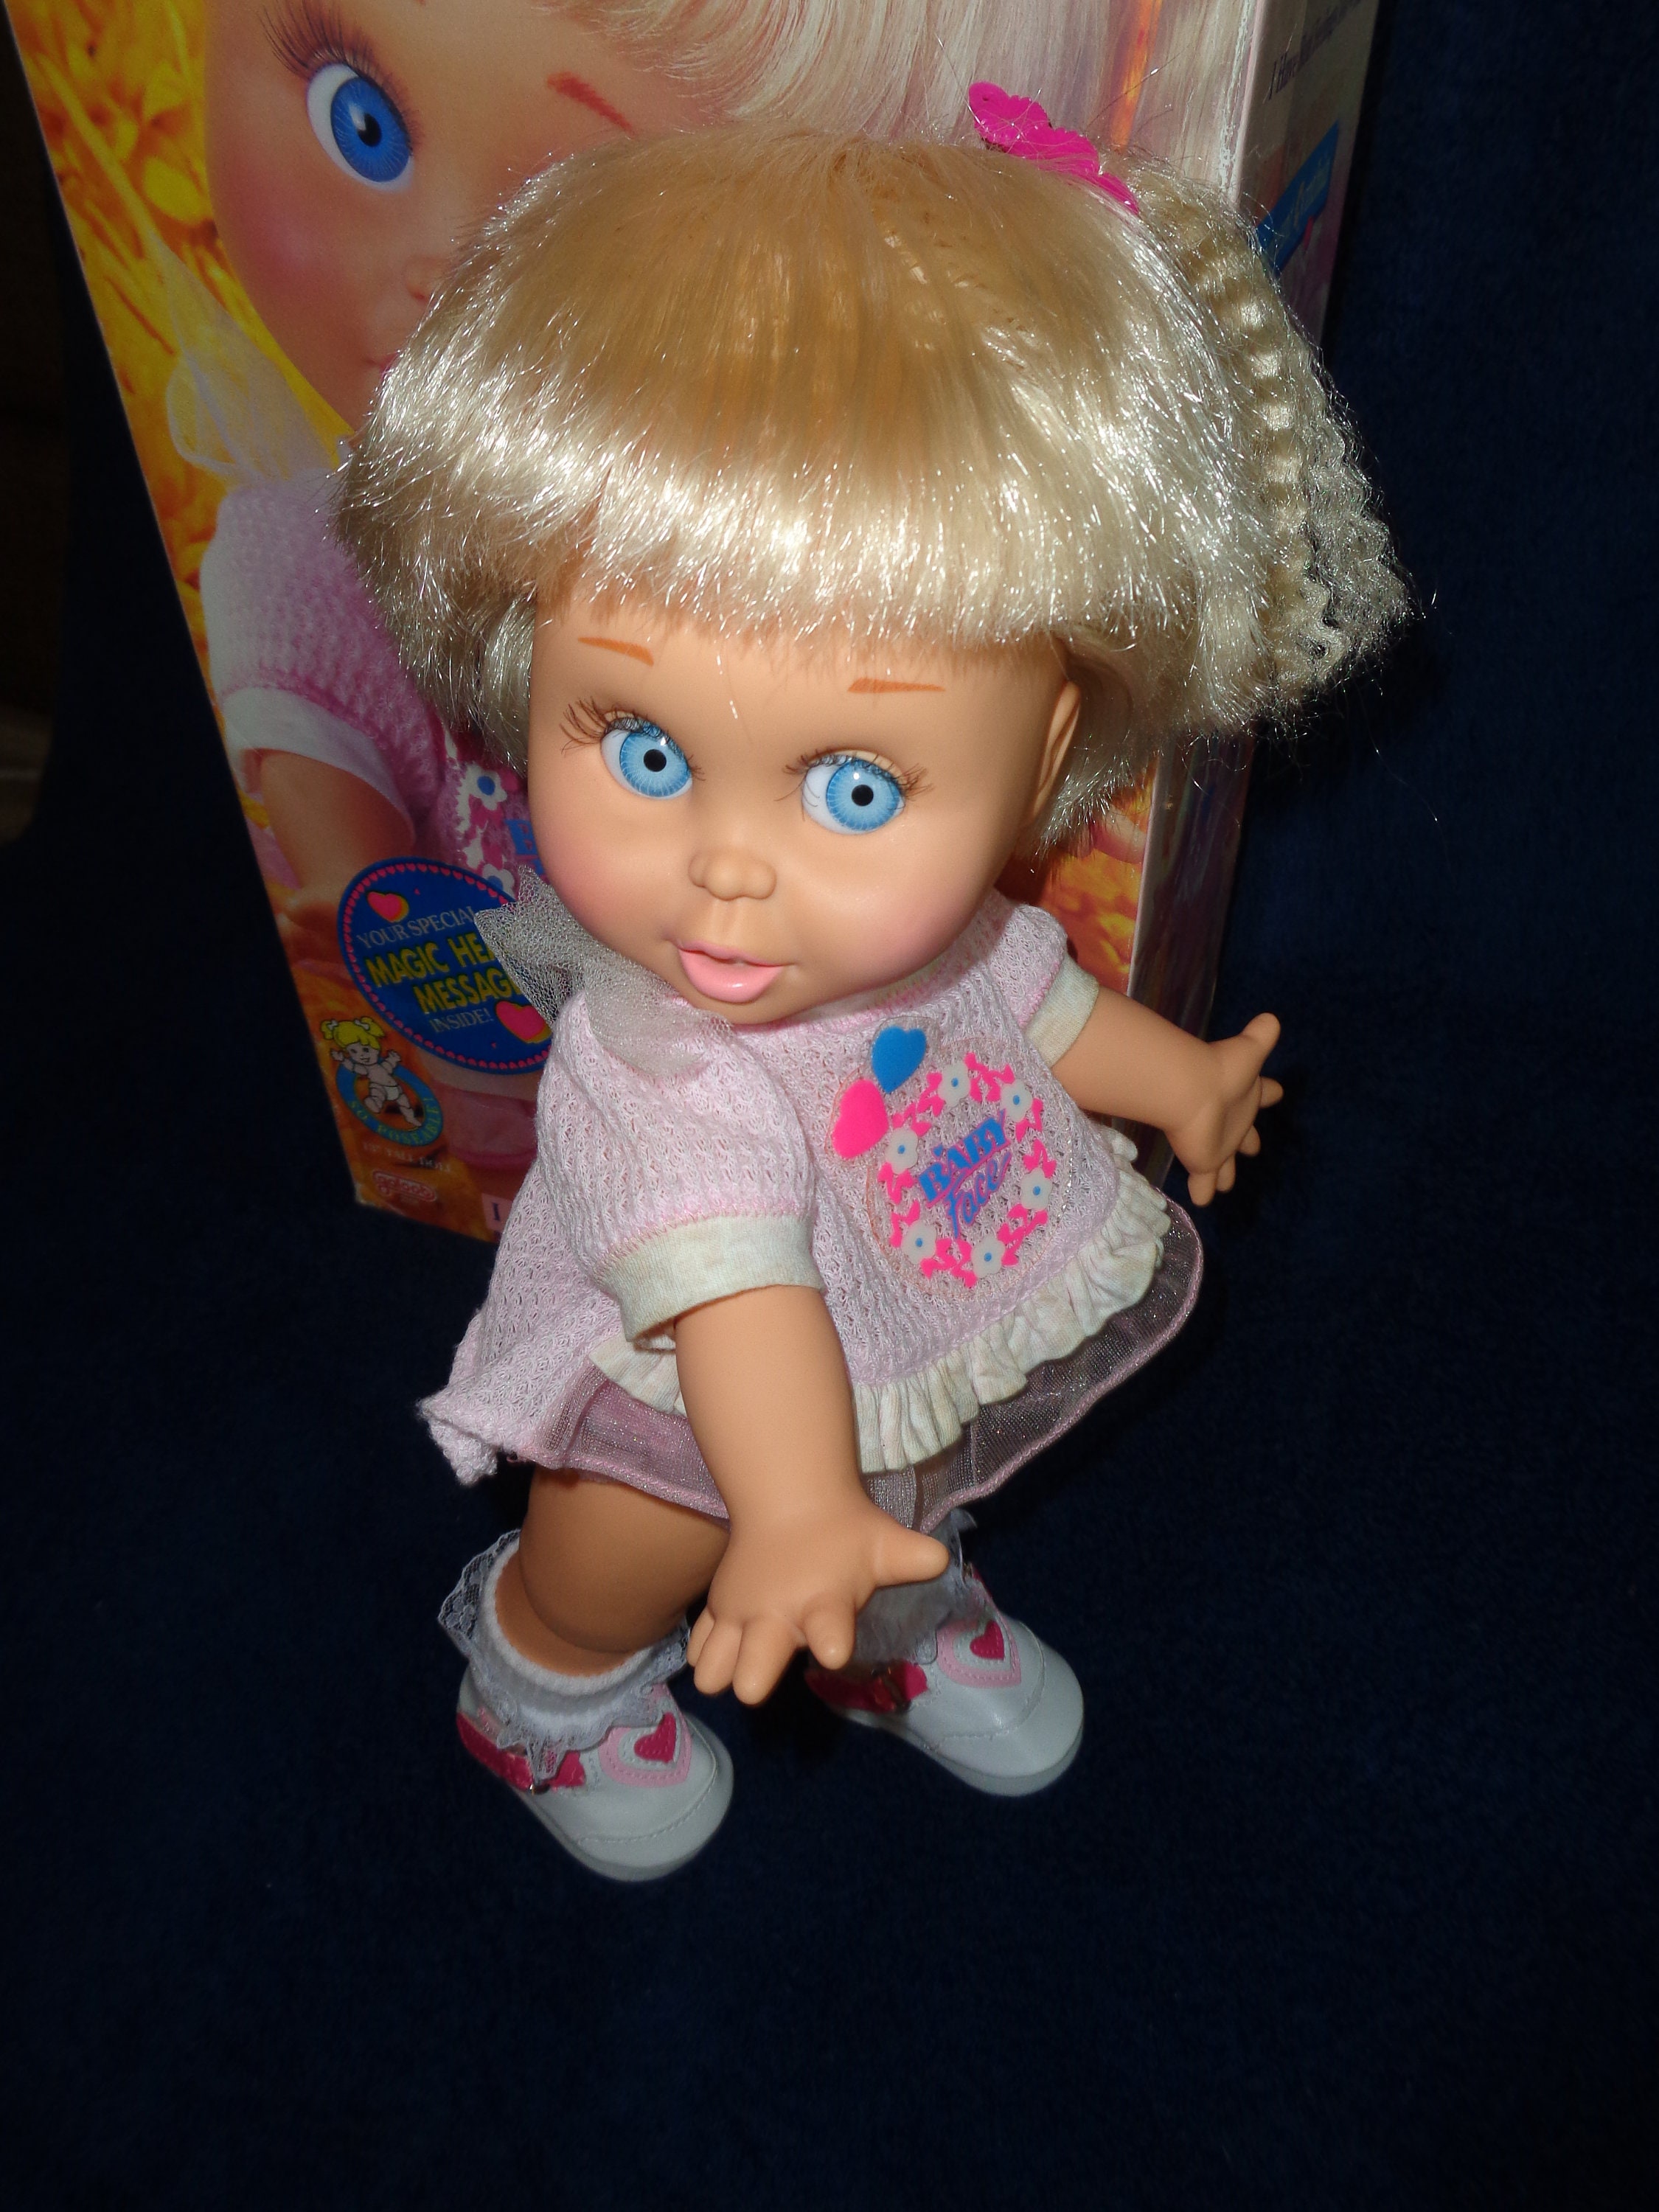 Vintage Galoob Baby Face So Sorry Sarah 1990s Doll - agrohort.ipb.ac.id